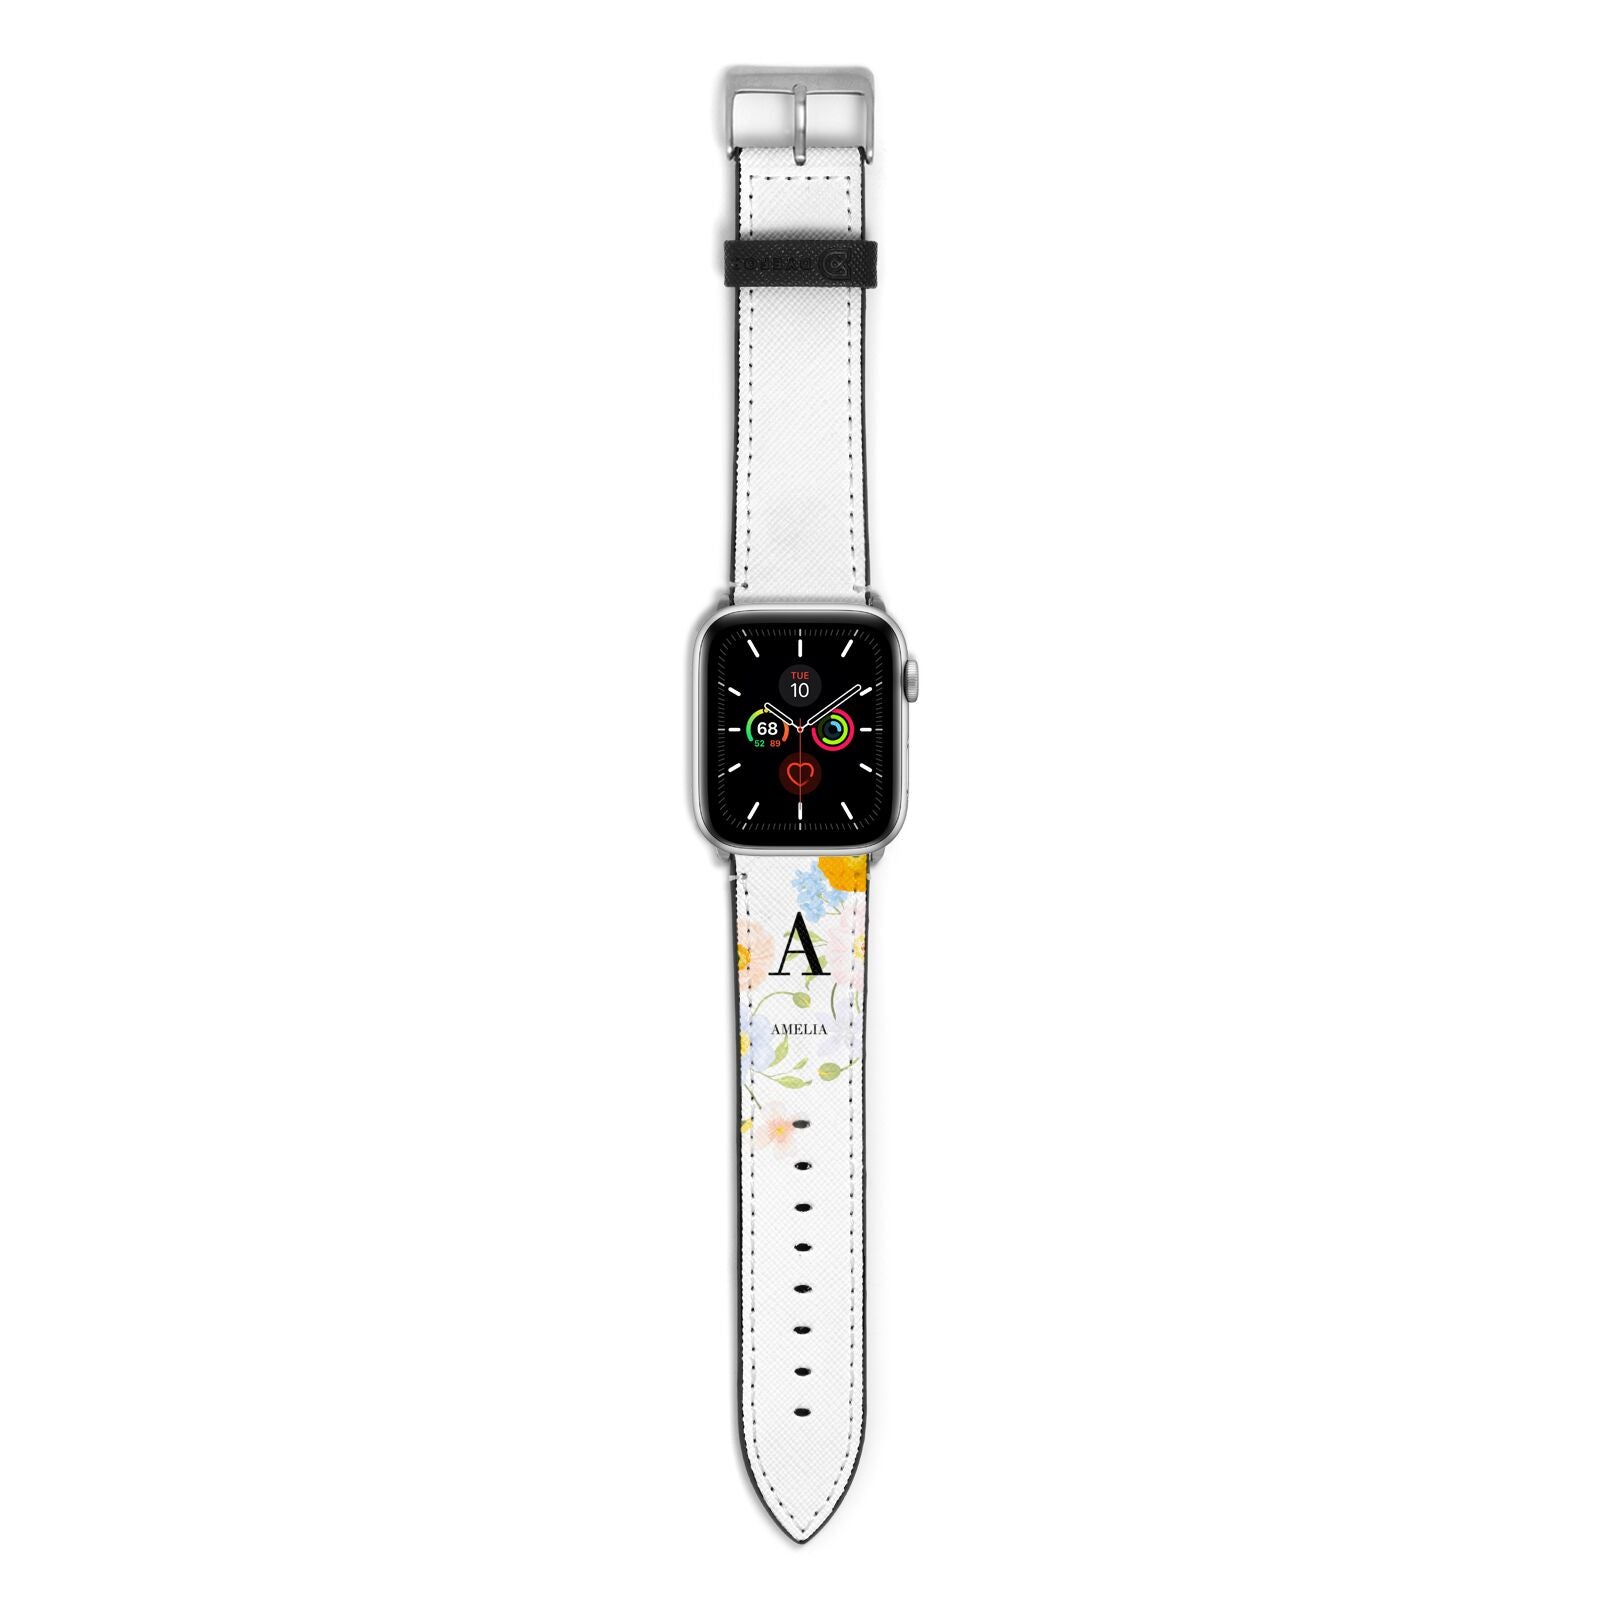 Customised Floral Apple Watch Strap with Silver Hardware